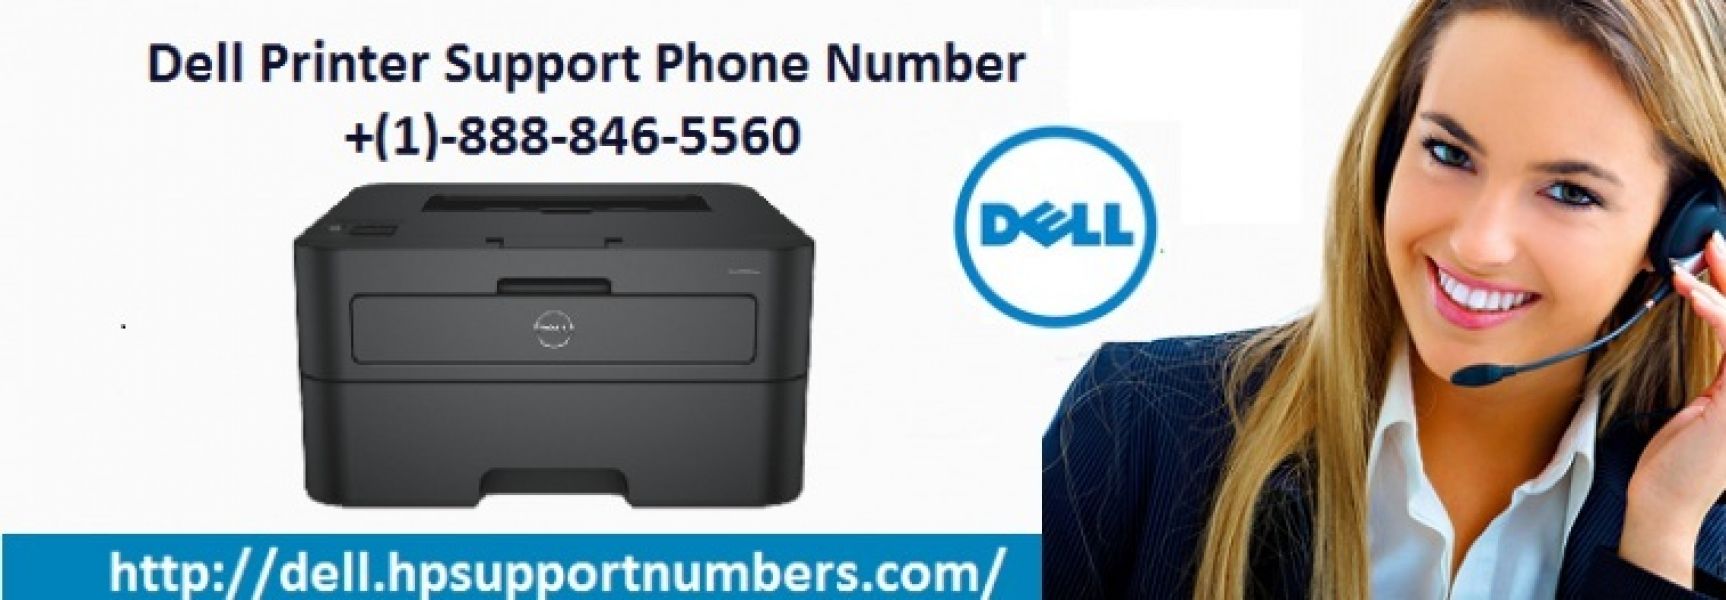 Dell Printer Tech Support Phone Number | +(1)-888-846-5560